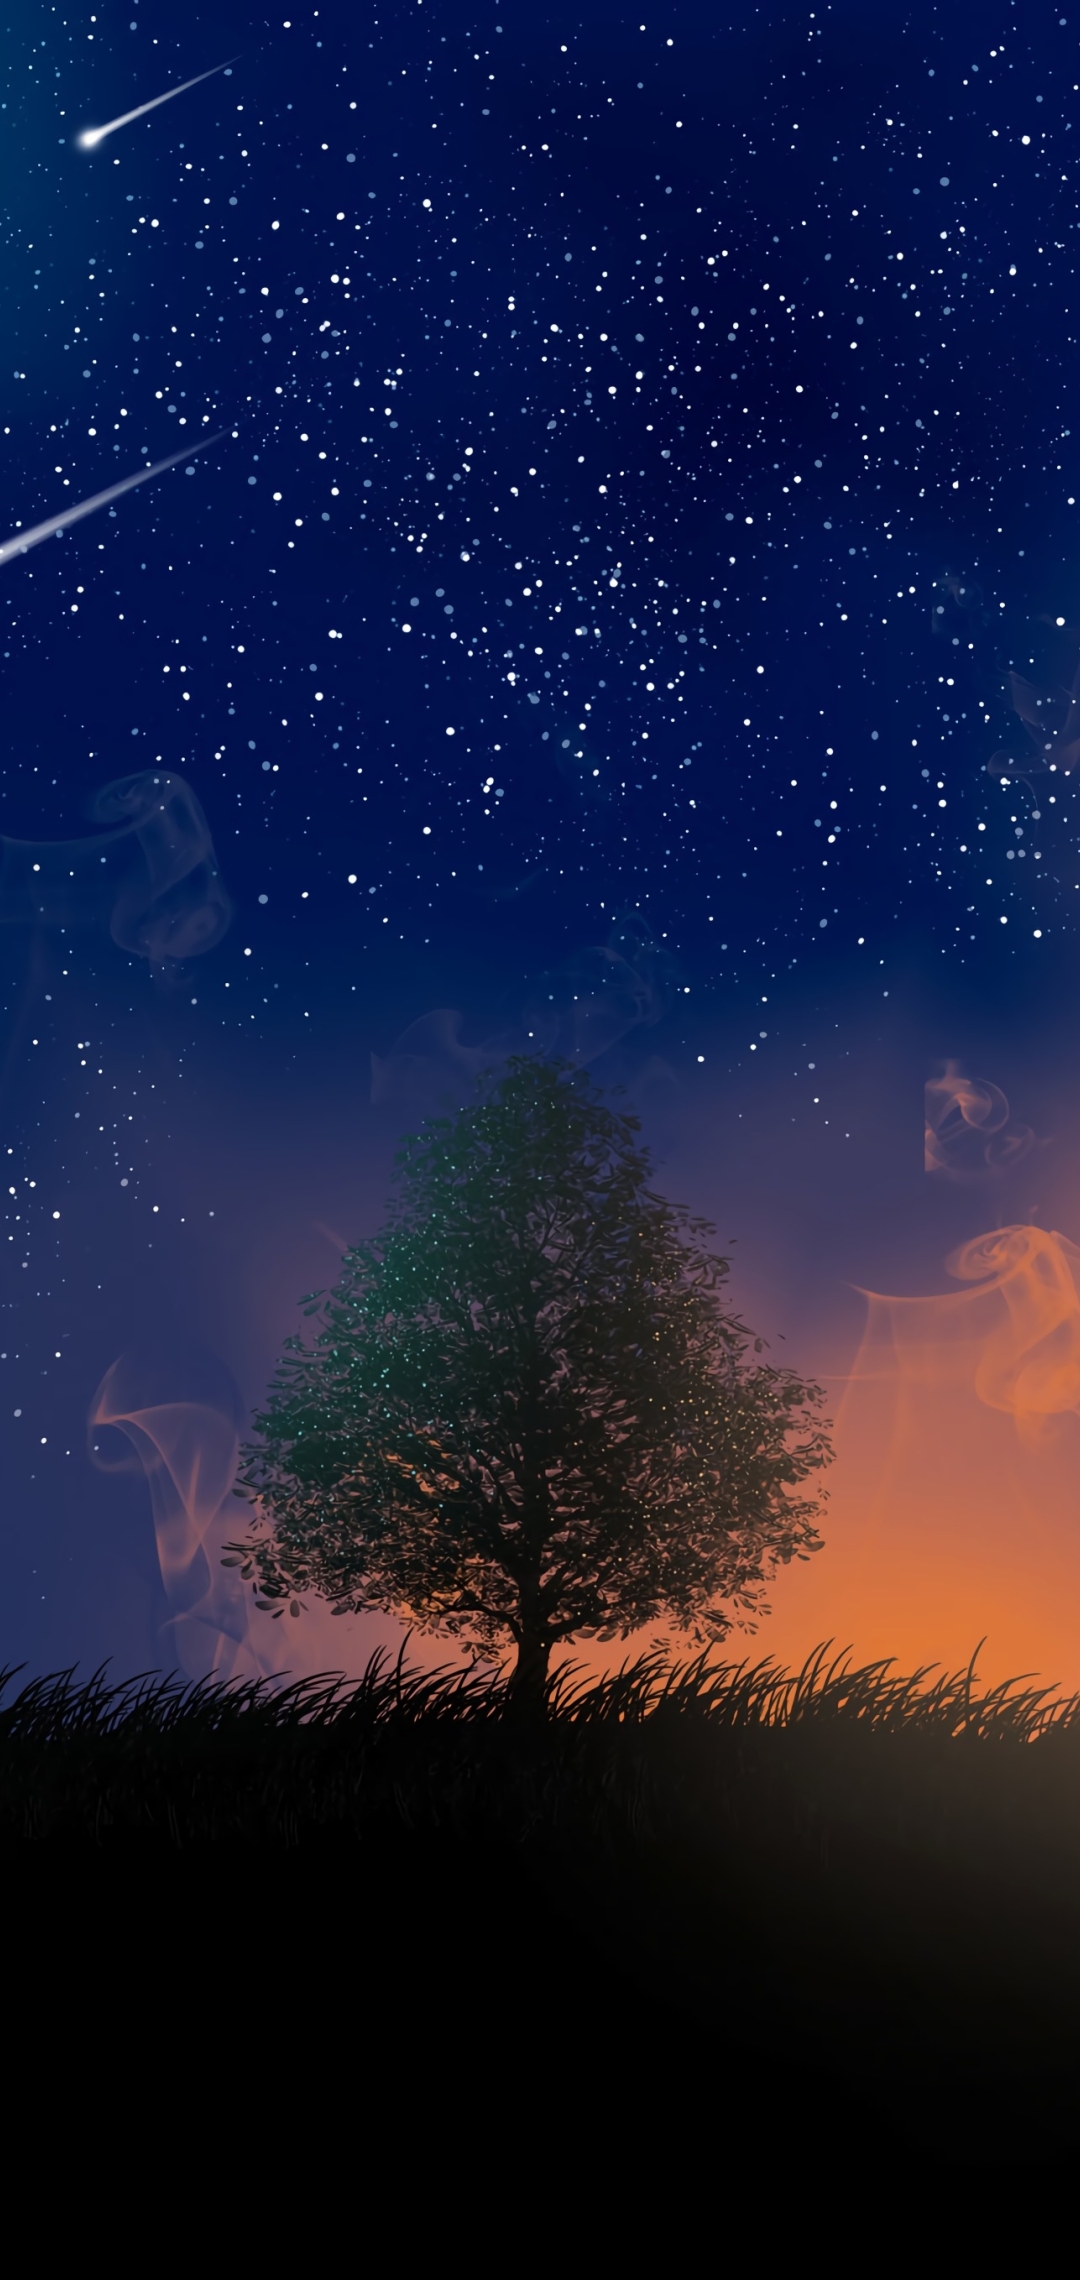 1080x2280 Tree And Shooting Stars 4k One Plus 6 Huawei P Honor View 10 Vivo Y85 Oppo F7 Xiaomi Mi Wallpaper Hd Artist 4k Wallpapers Images Photos And Background